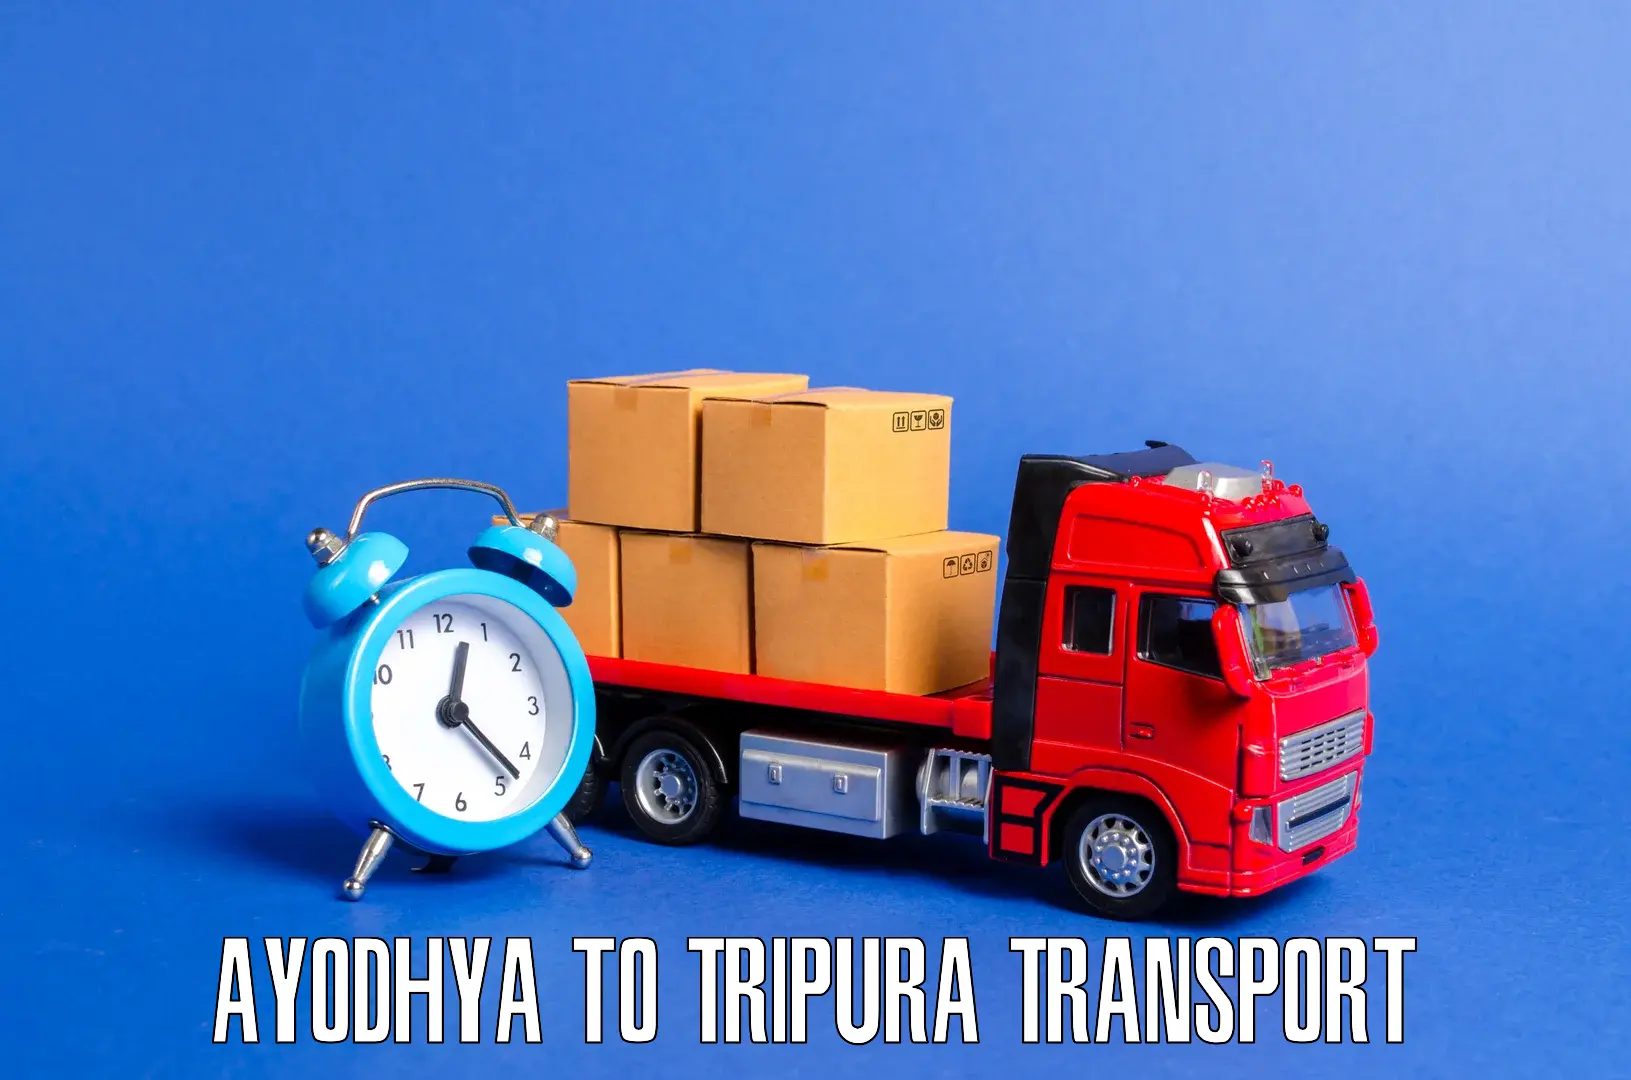 Transport bike from one state to another in Ayodhya to Udaipur Tripura